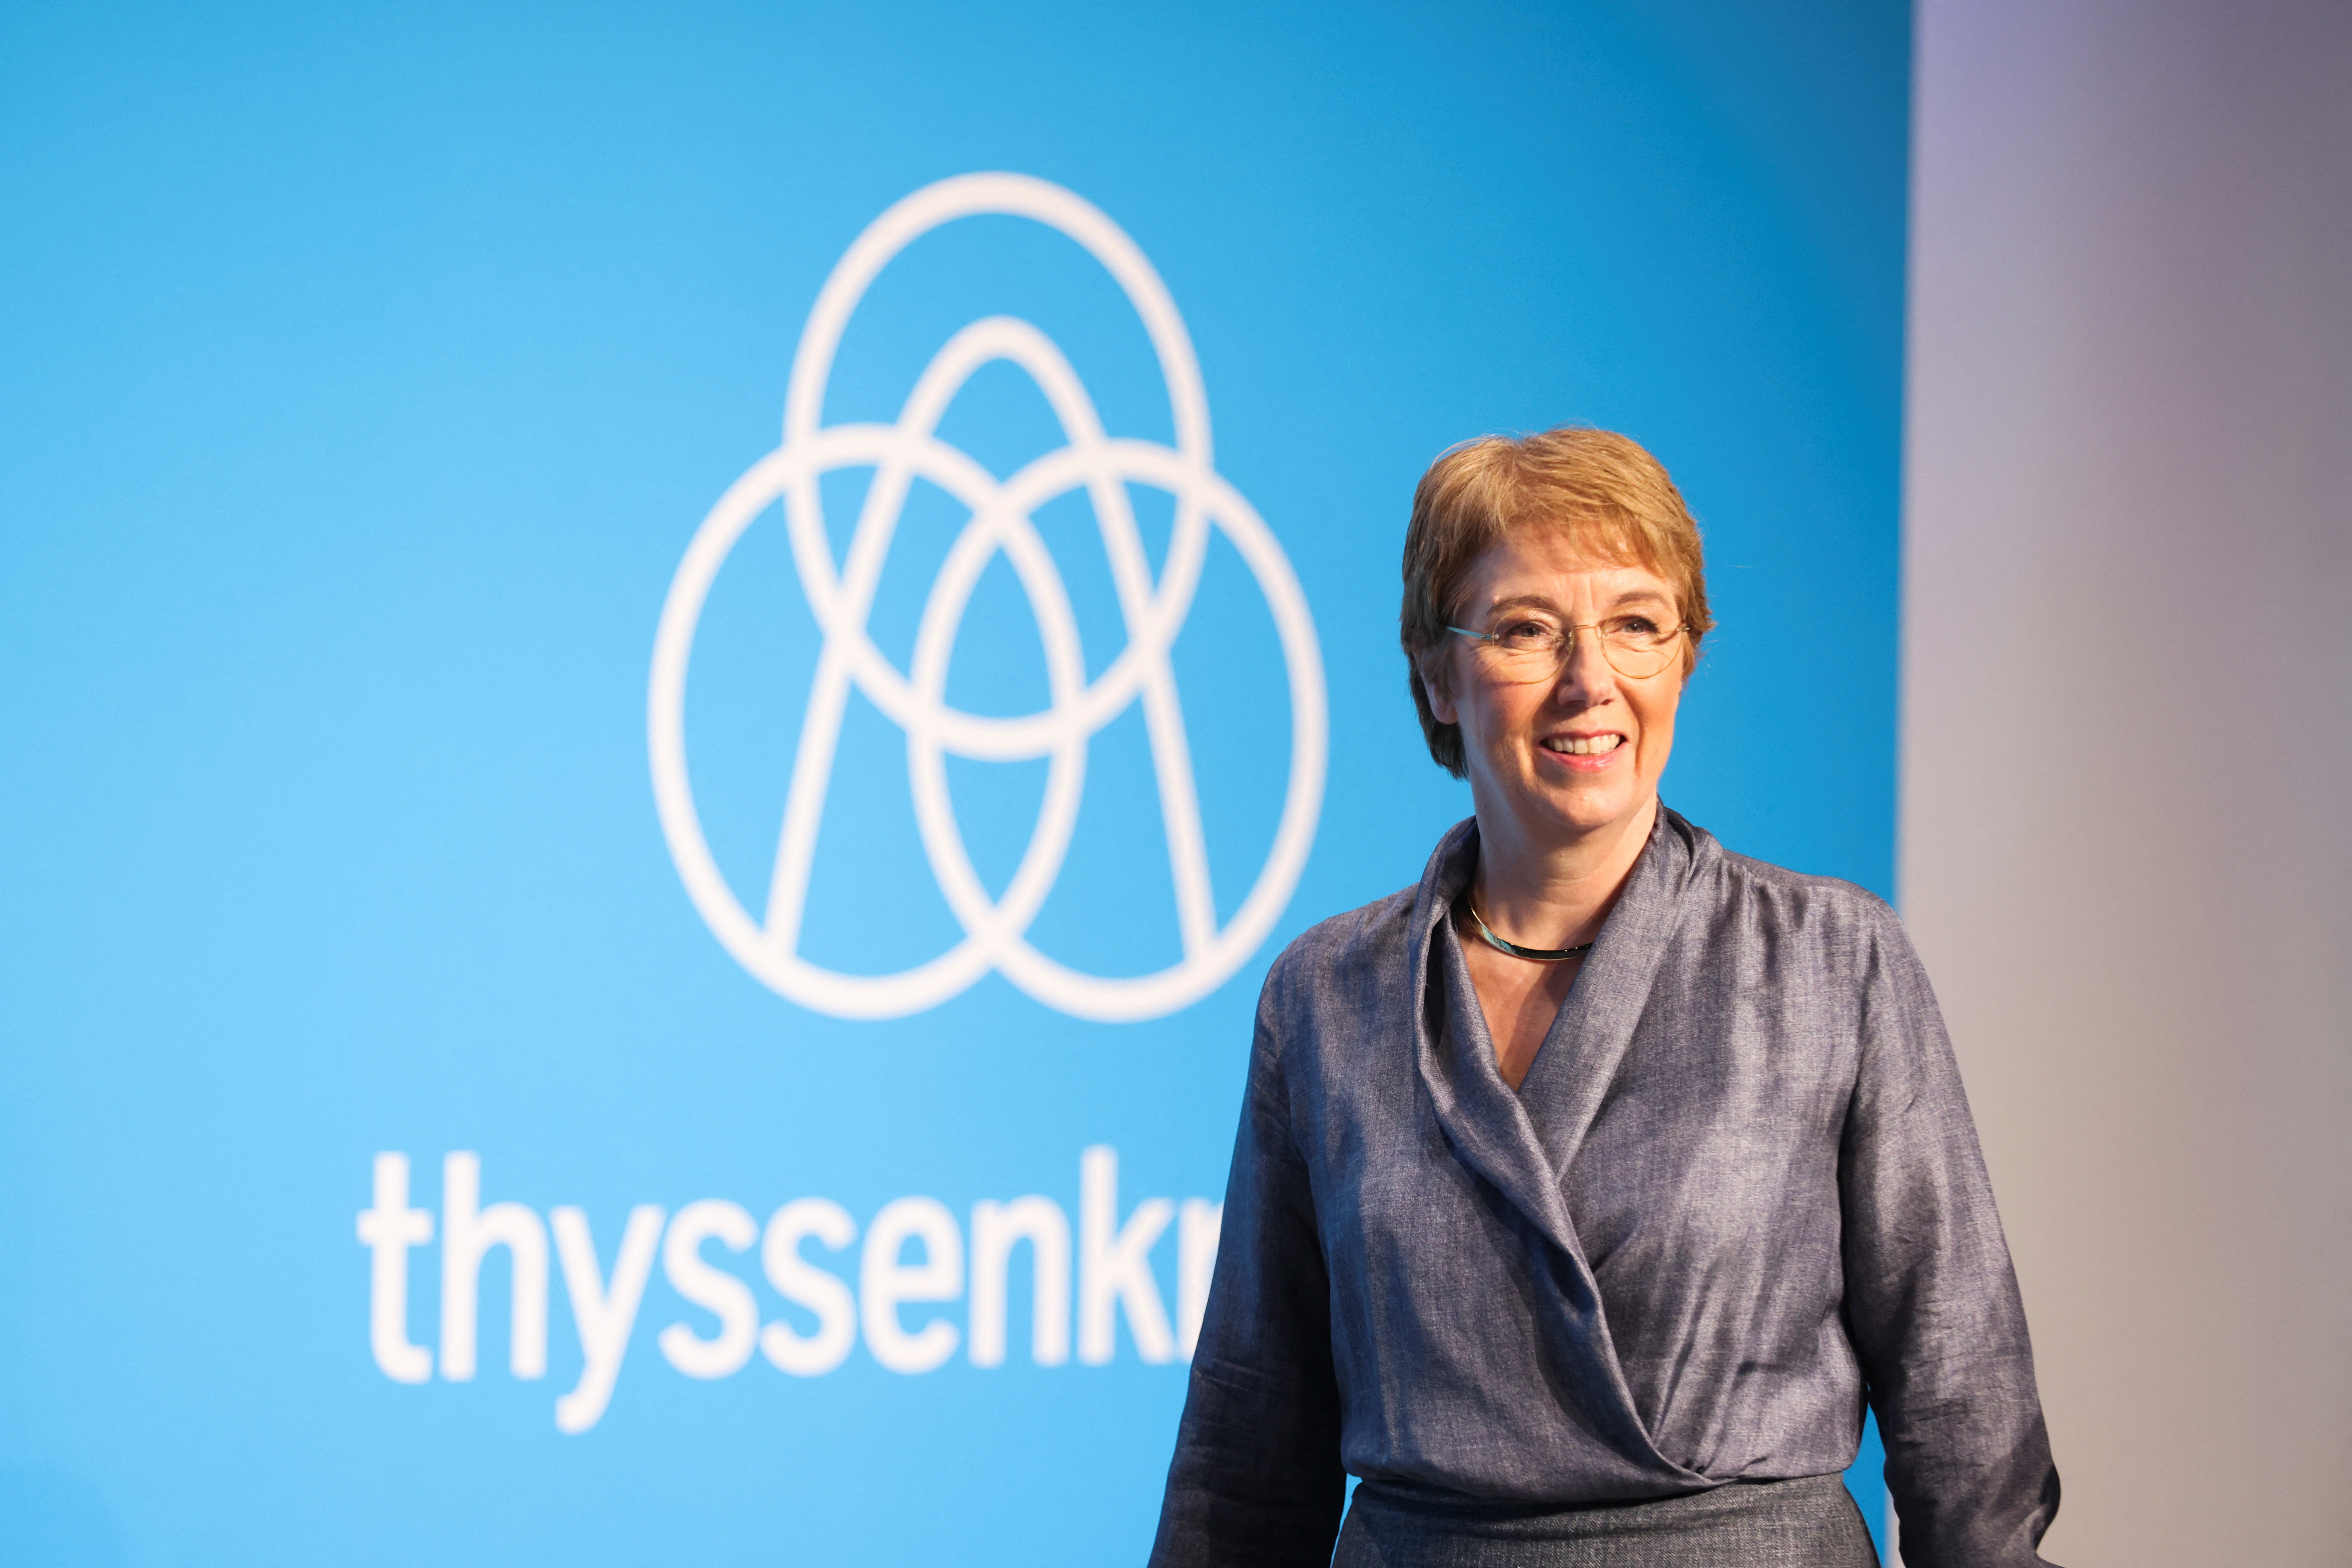 ThyssenKrupp AG annual results news conference in Essen